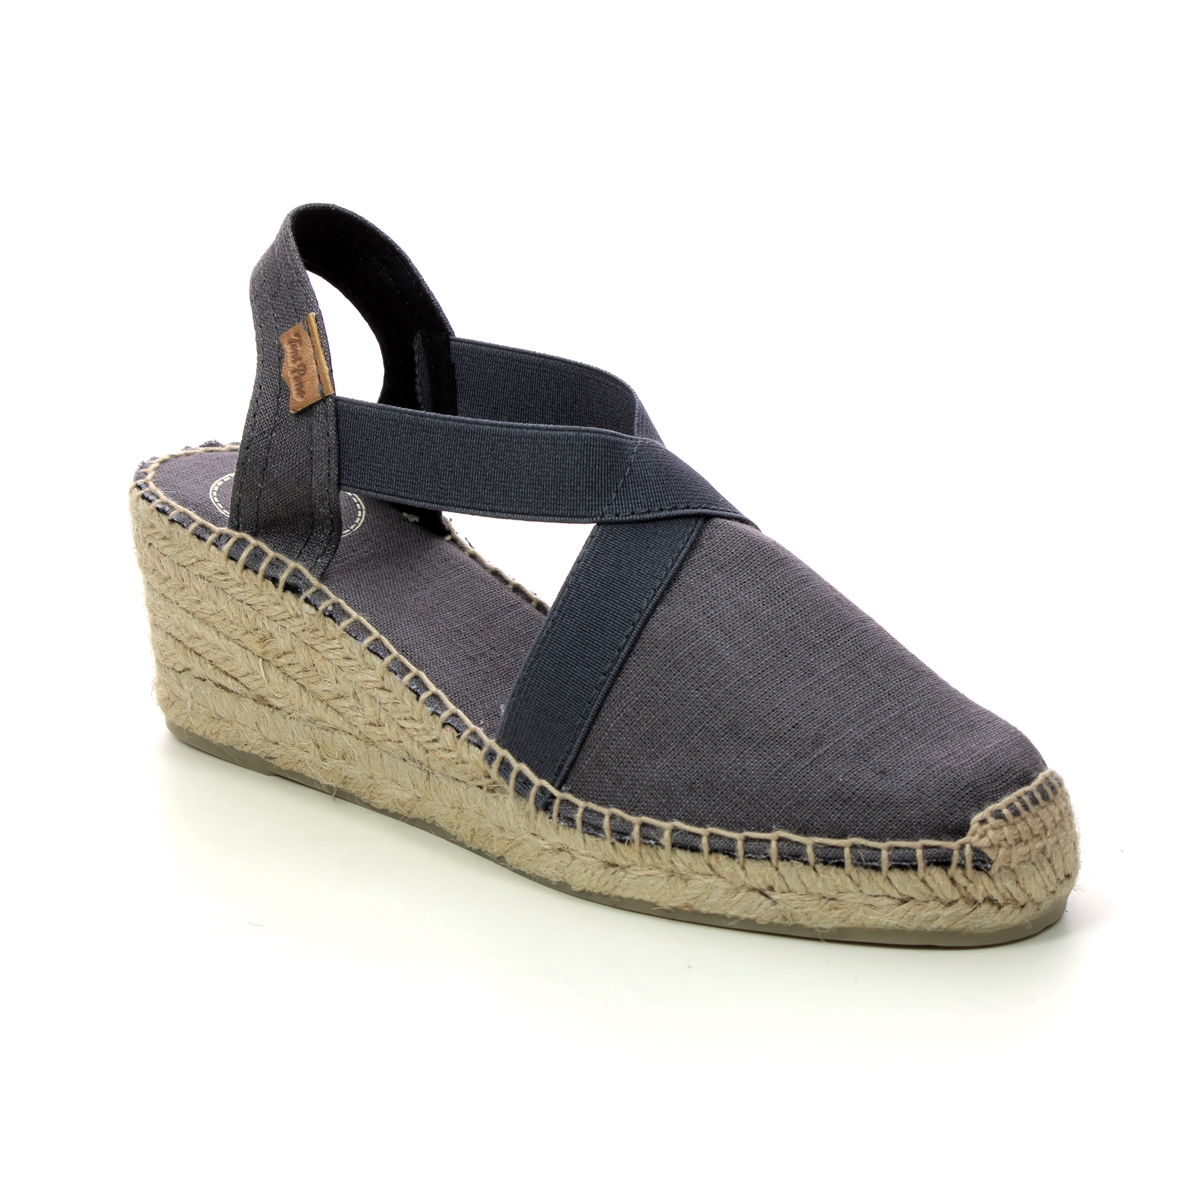 Toni Pons Ter Grey Womens Espadrilles 1003-00 in a Plain Canvas in Size 38